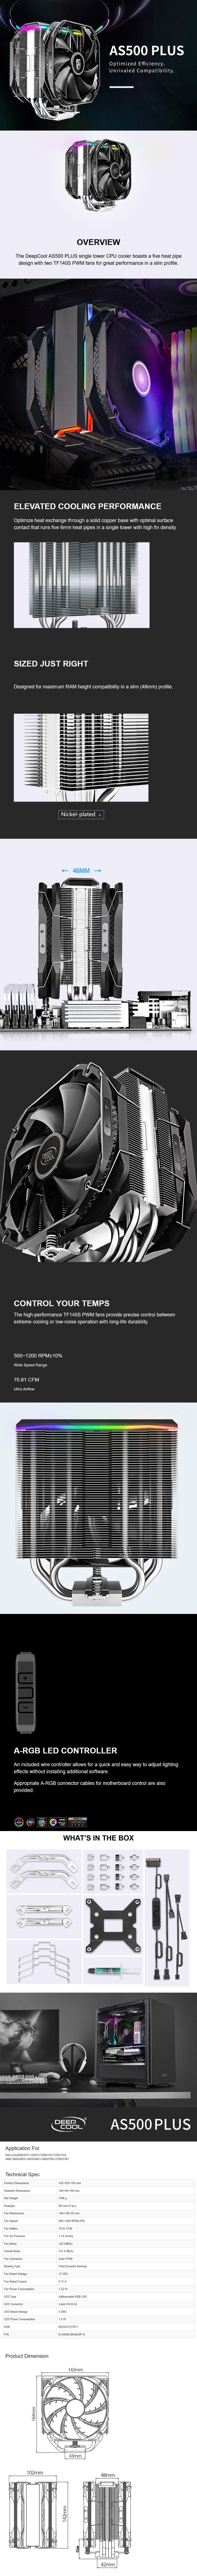 A large marketing image providing additional information about the product DeepCool AS500 PLUS CPU Cooler - Additional alt info not provided